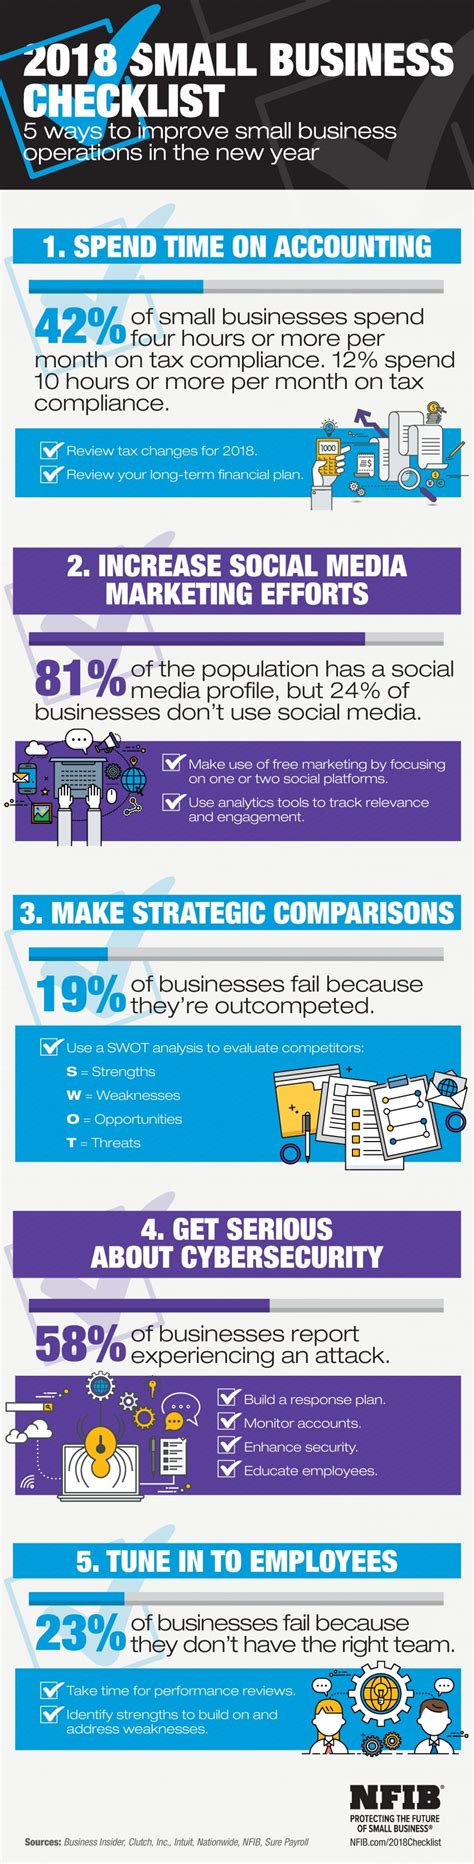 Add These 5 Things to Your Business Checklist, NFIB Says (INFOGRAPHIC ...